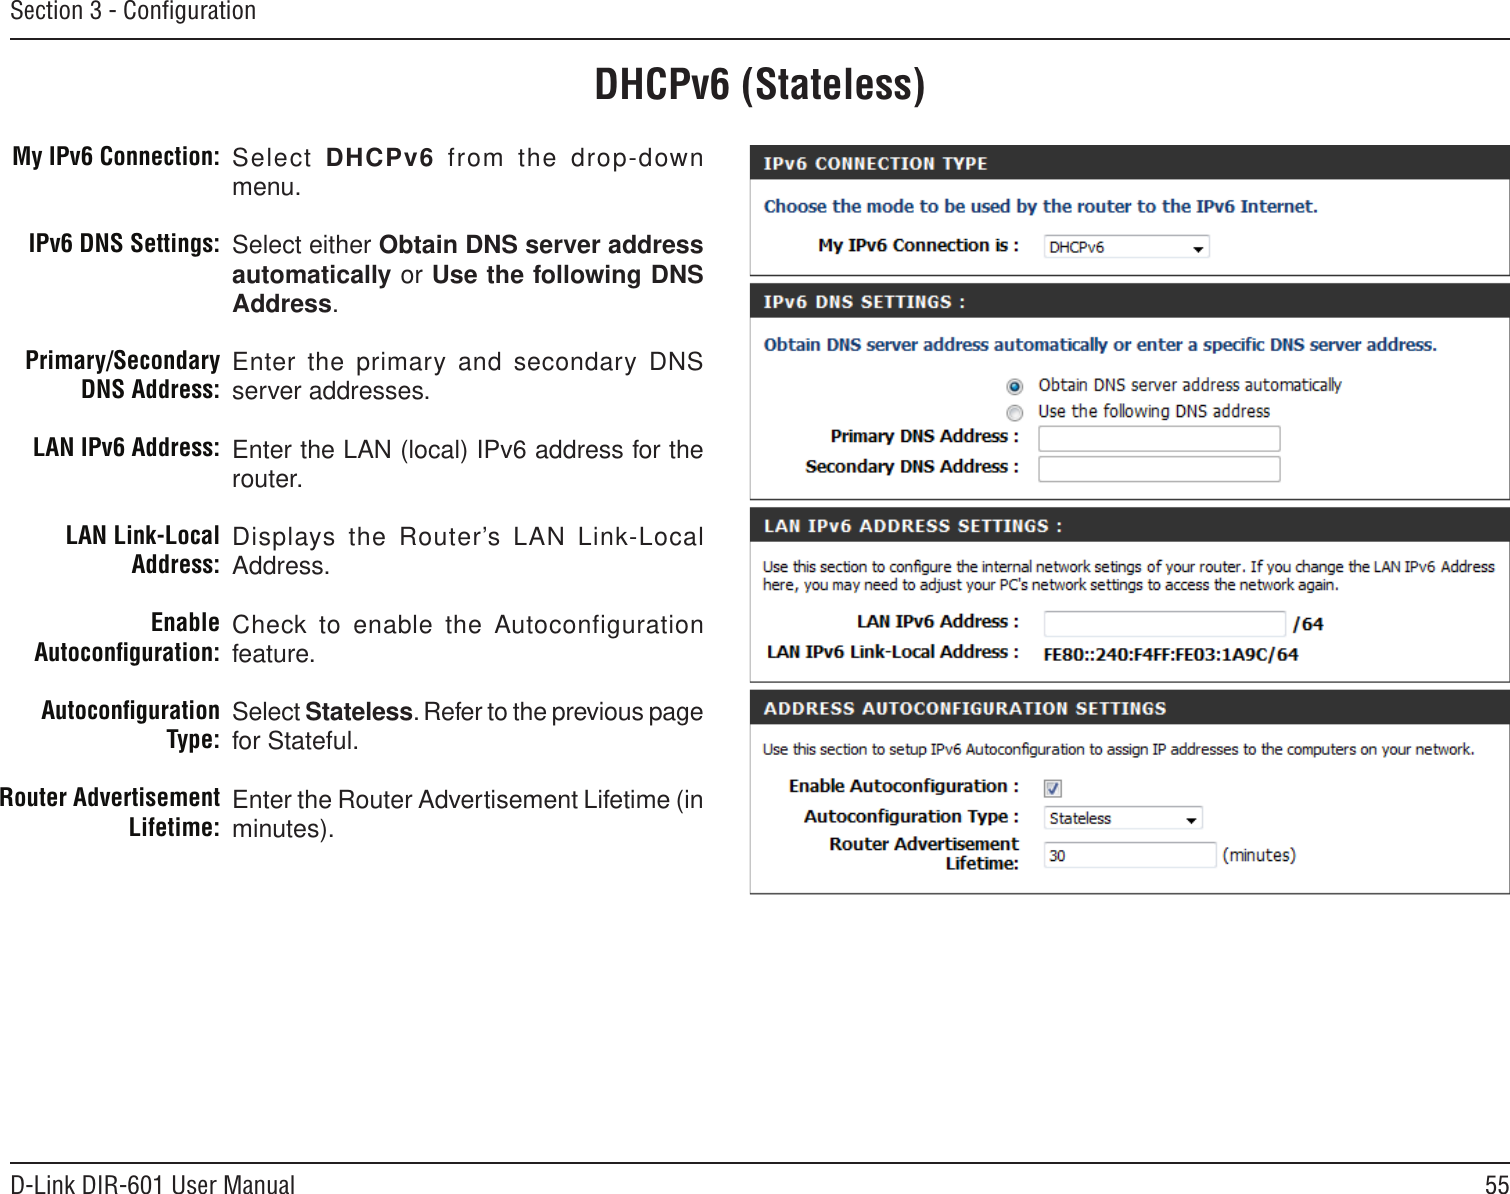 55D-Link DIR-601 User ManualSection 3 - ConﬁgurationDHCPv6 (Stateless)Select DHCPv6  from  the  drop-down menu.Select either Obtain DNS server address automatically or Use the following DNS Address.Enter the primary  and secondary DNS server addresses. Enter the LAN (local) IPv6 address for the router. Displays the Router’s LAN  Link-Local Address.Check to enable the Autoconfiguration feature.Select Stateless. Refer to the previous page for Stateful.Enter the Router Advertisement Lifetime (in minutes).My IPv6 Connection:IPv6 DNS Settings:Primary/Secondary DNS Address:LAN IPv6 Address:LAN Link-Local Address:Enable Autoconﬁguration:Autoconﬁguration Type:Router Advertisement  Lifetime: